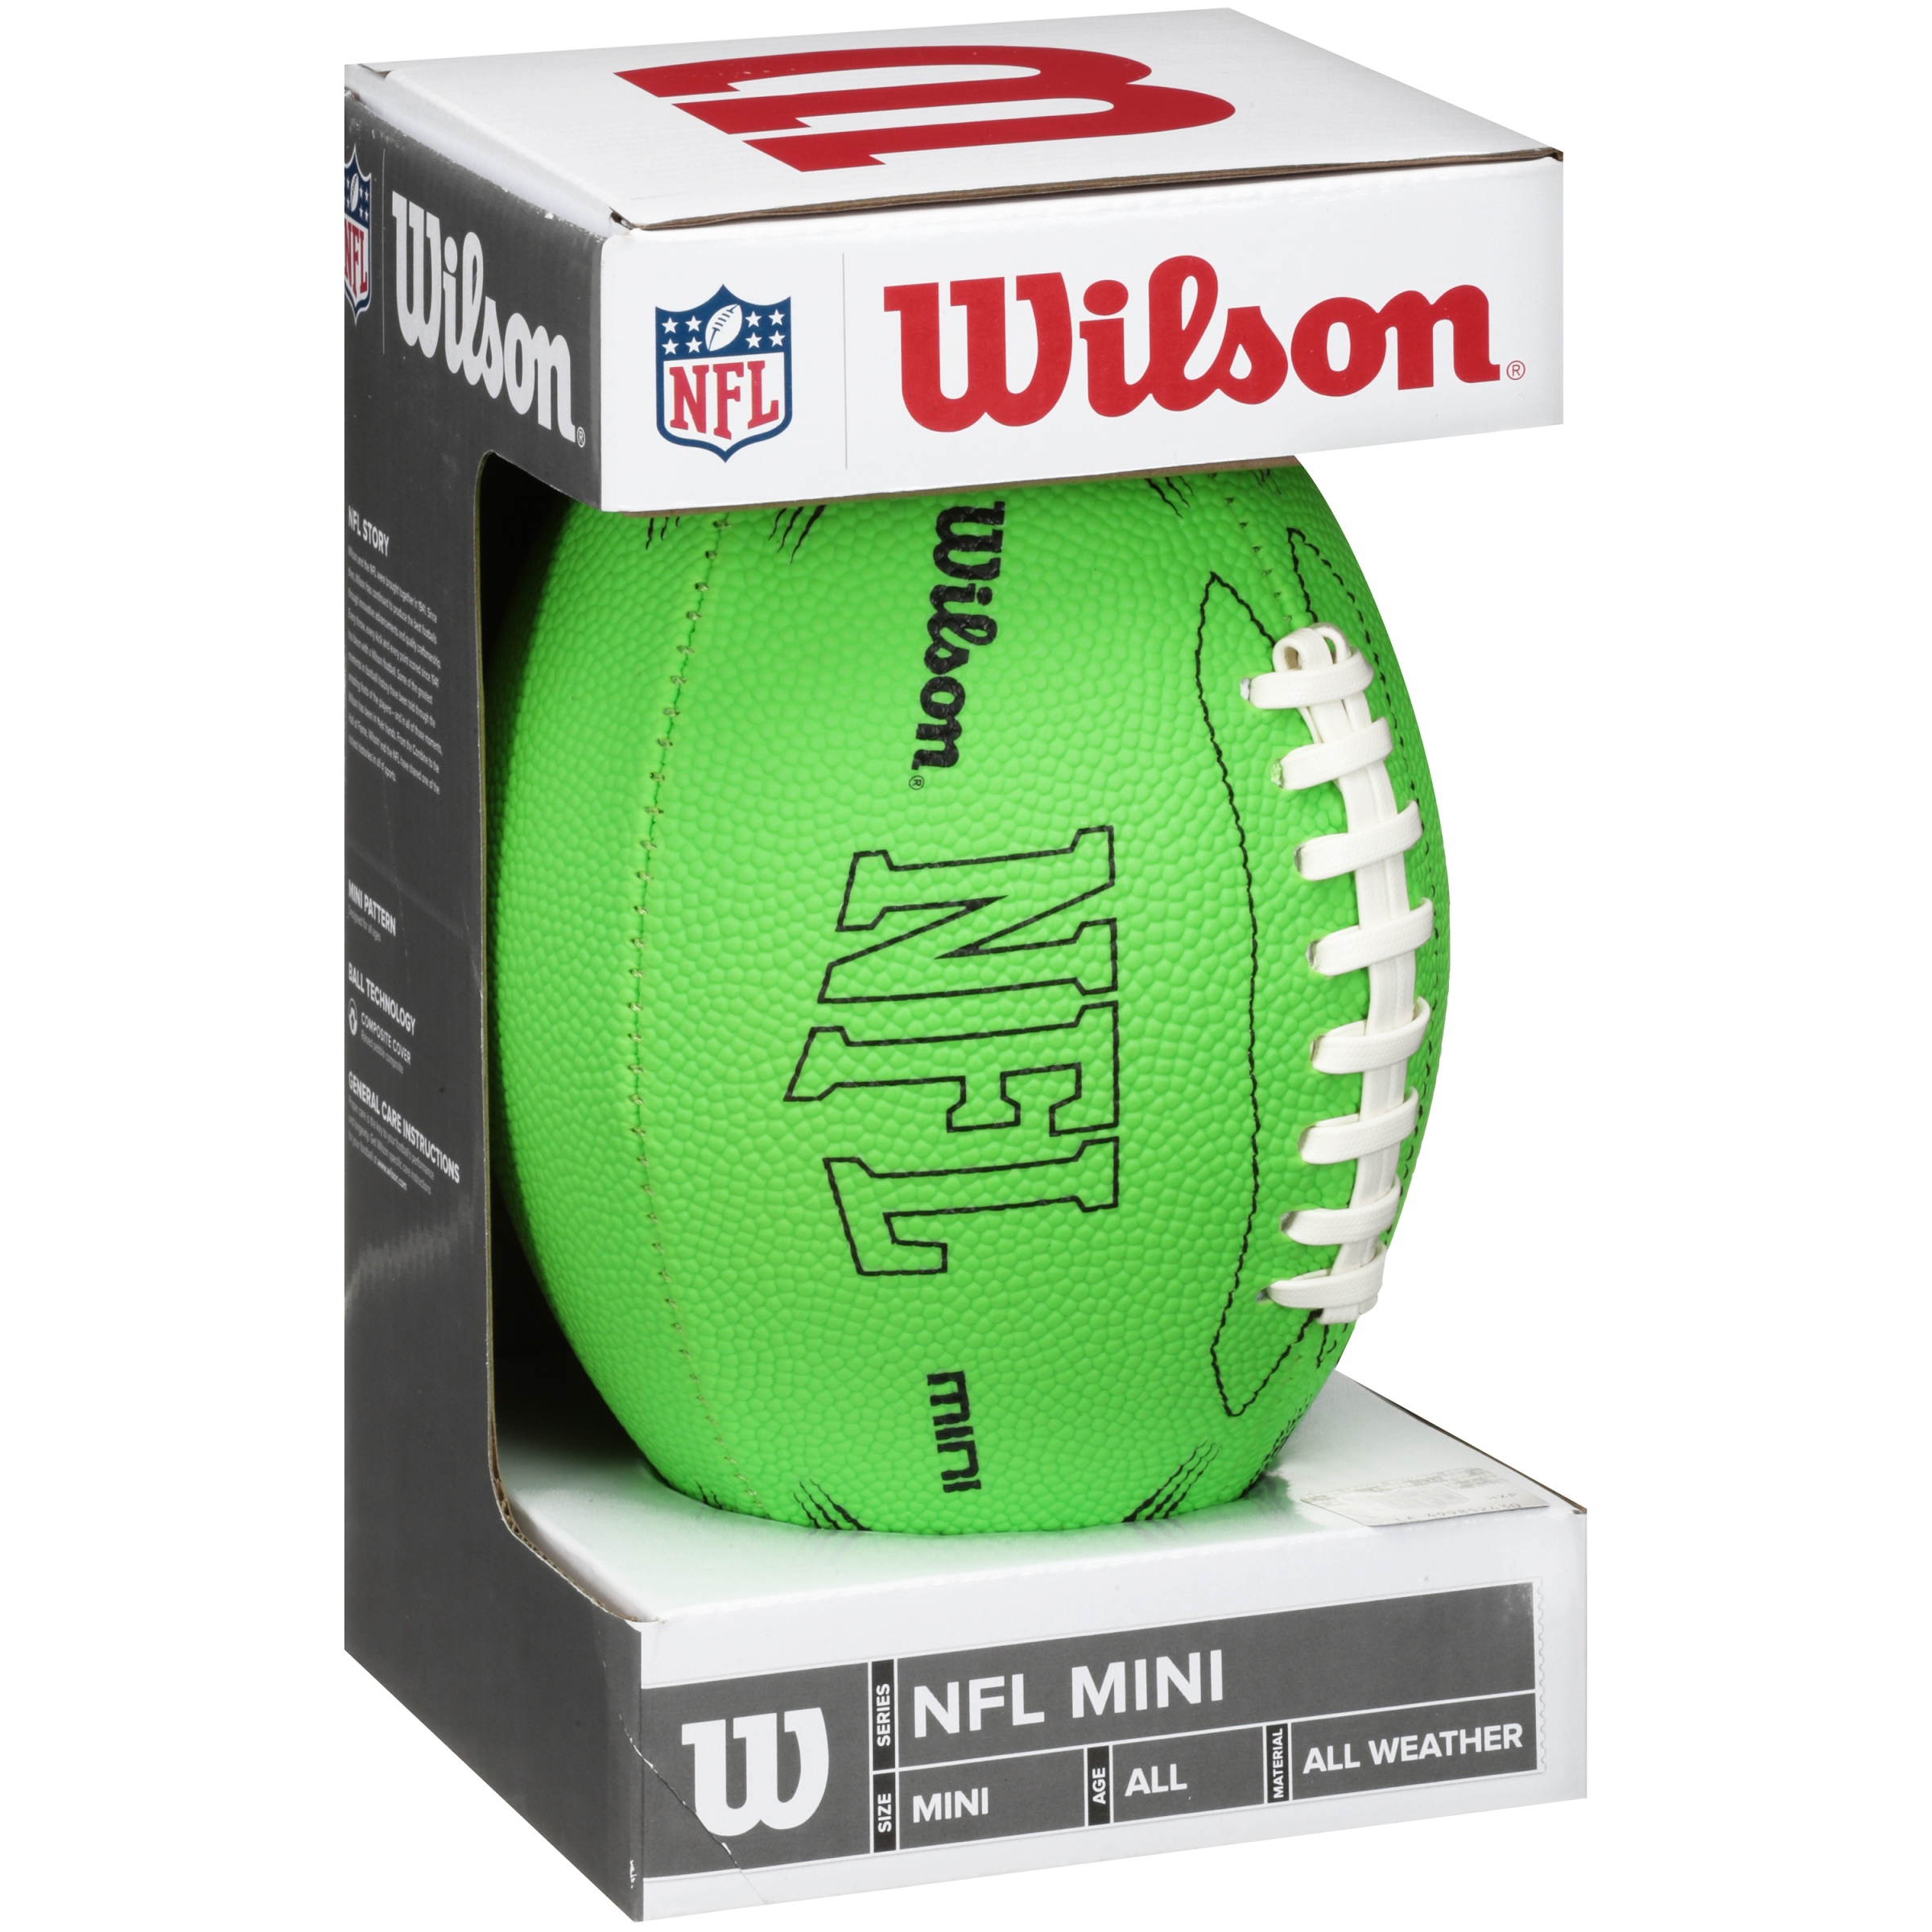 Wilson Sporting Goods NFL Mini Rubber Youth Football, Green - image 2 of 4